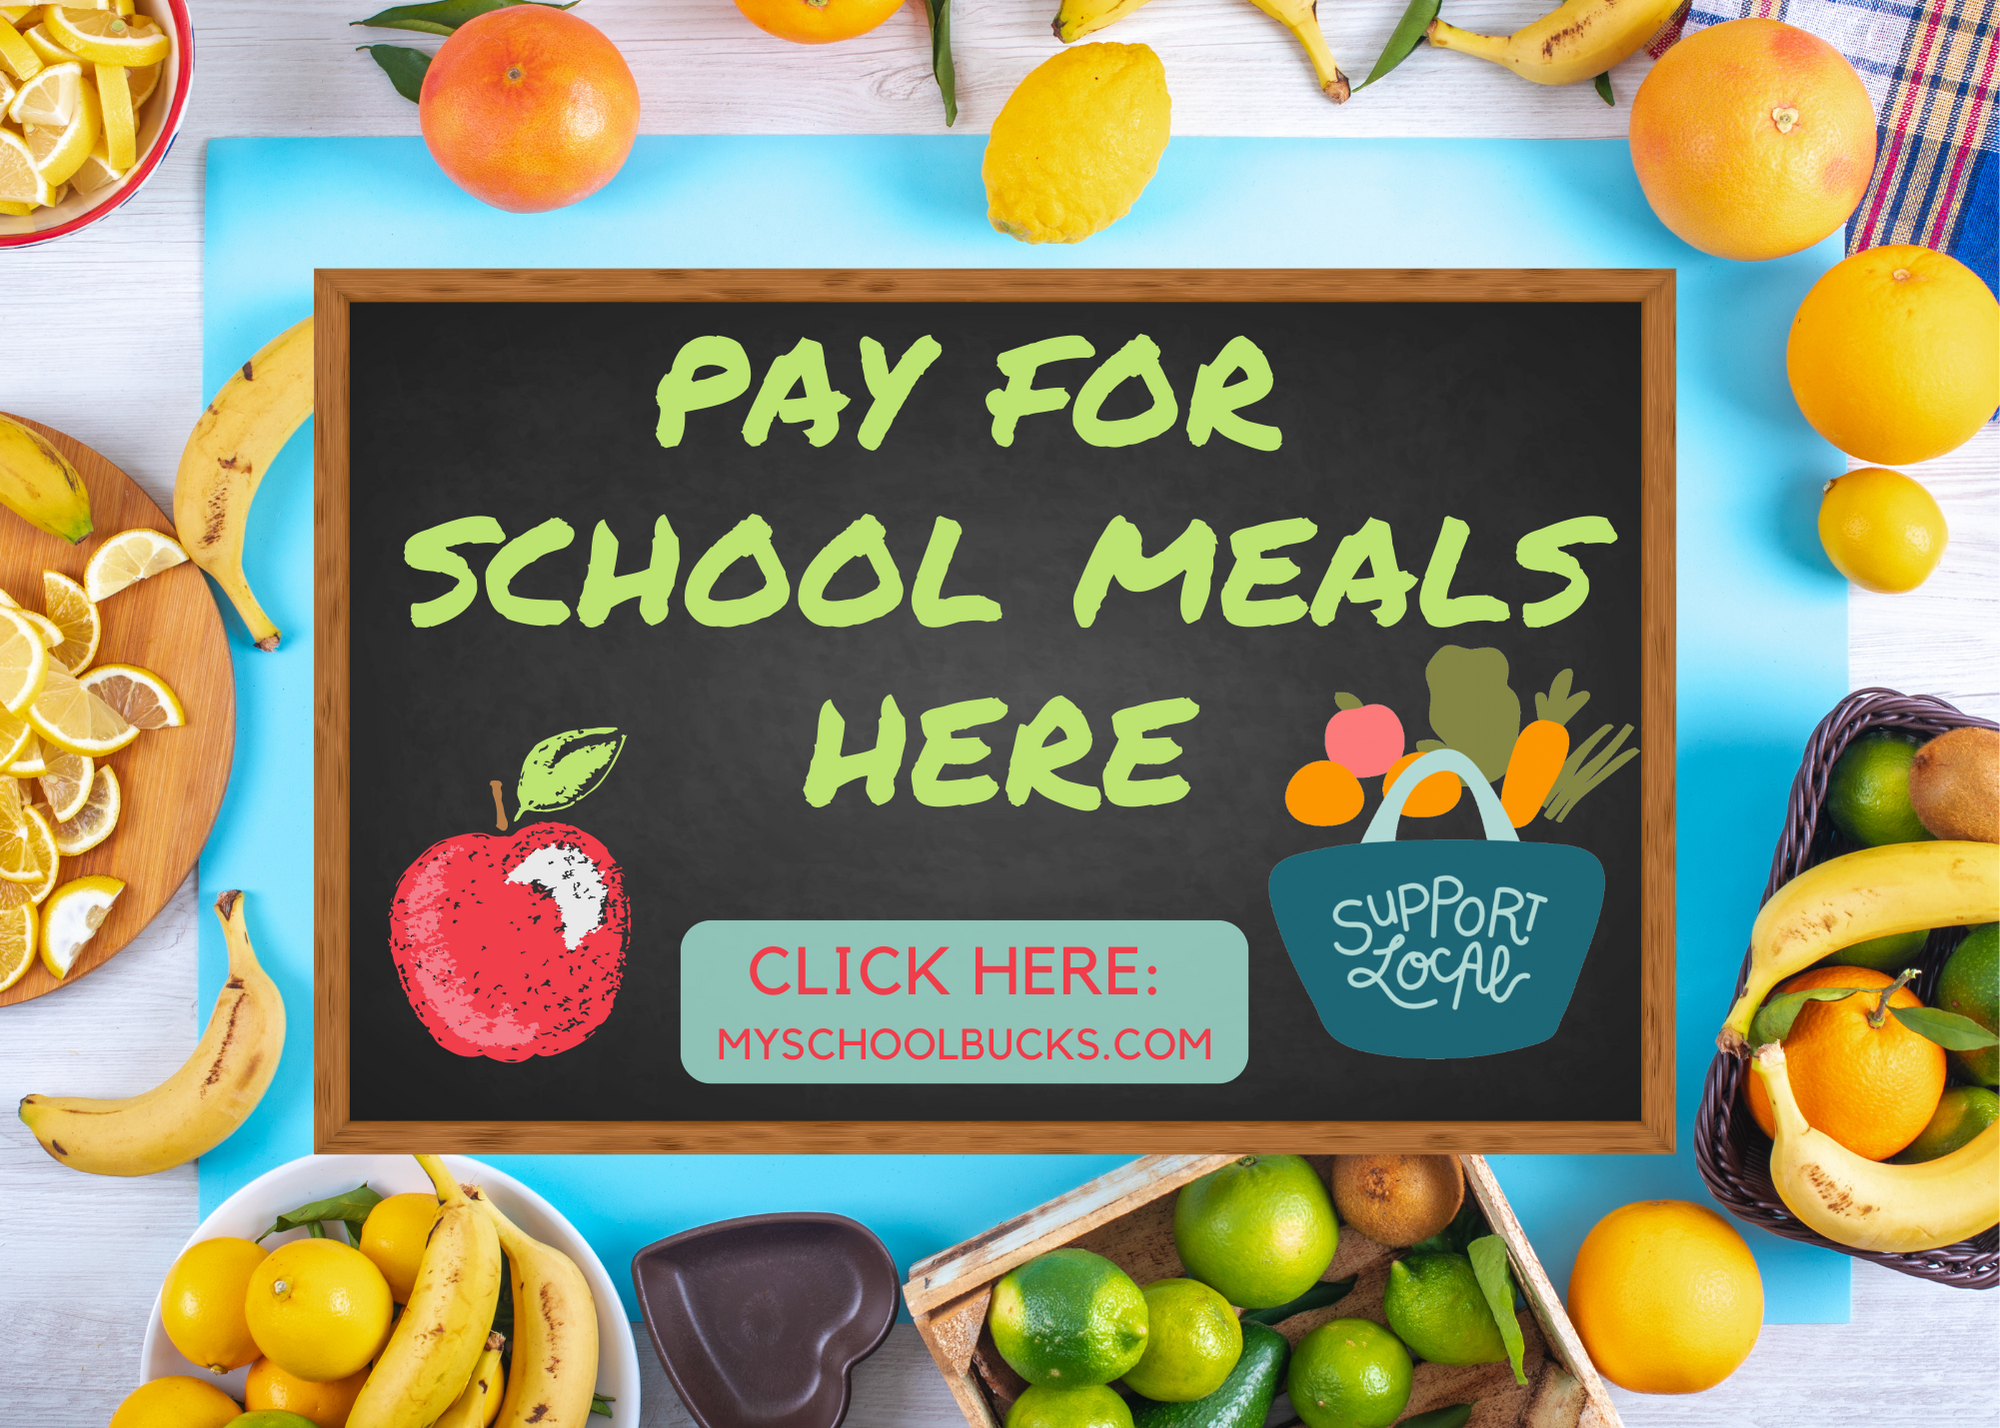 SNP-PAY FOR SCHOOL MEALS HERE